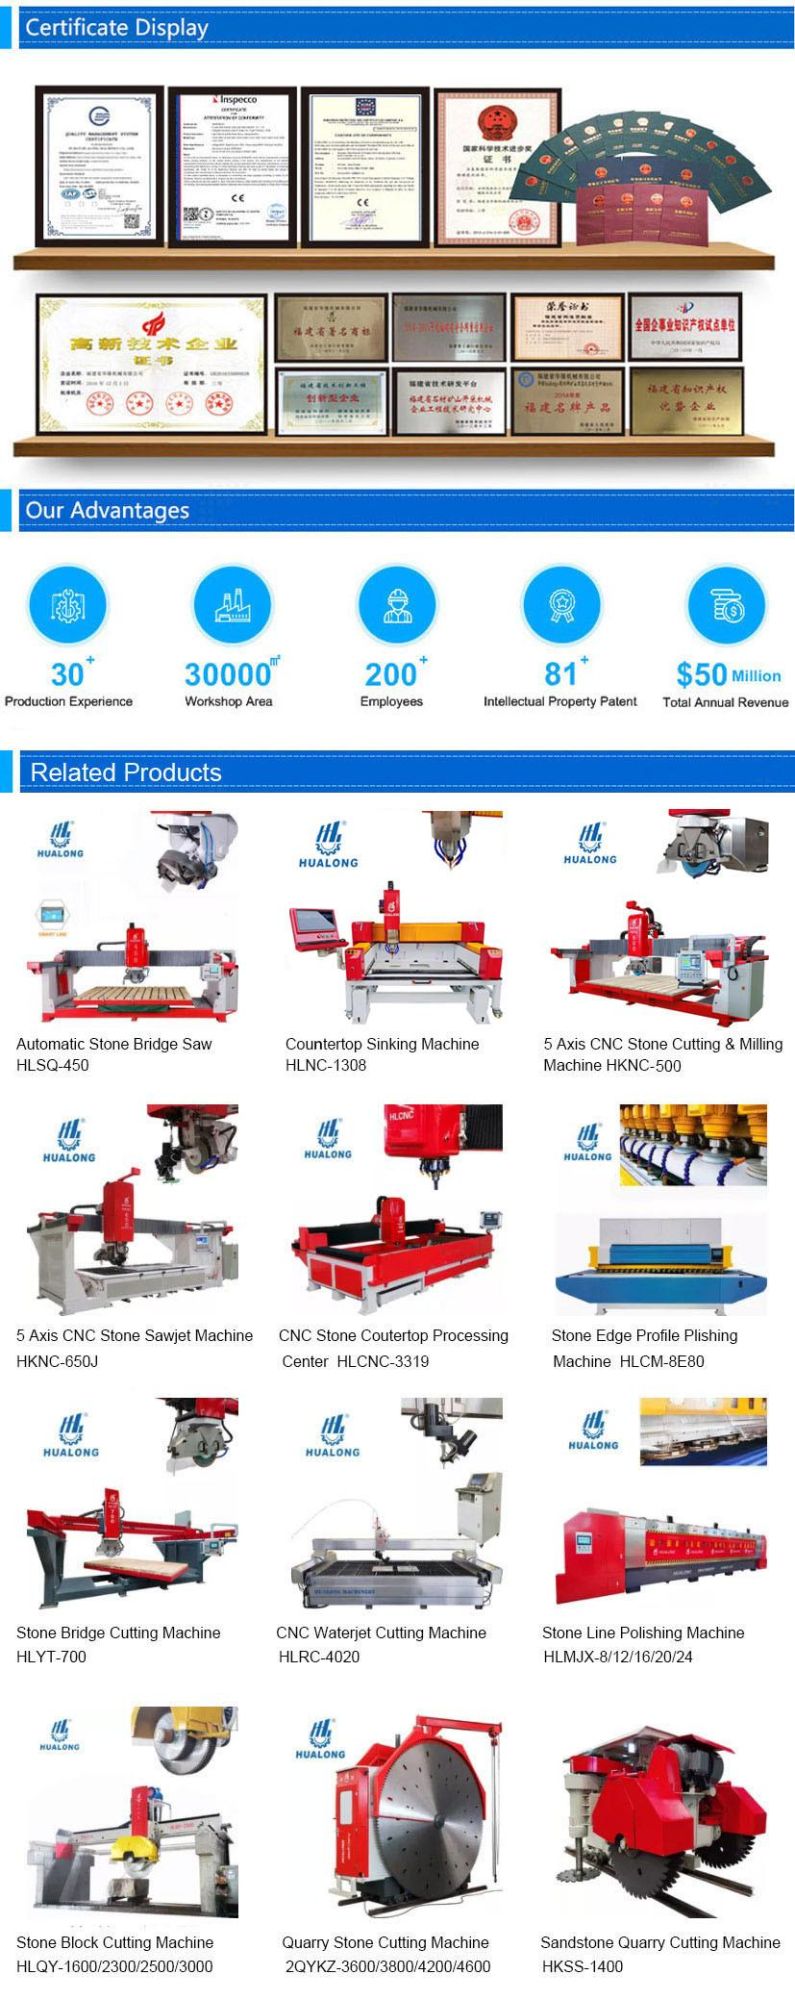 Stone Waterjet Machine, Cutter Equipment with Water, 60 Degree Chamfering Cutting for Ceramic Stone Metal Glass Sheets, CNC Water Jet Cutting Machine in Qatar